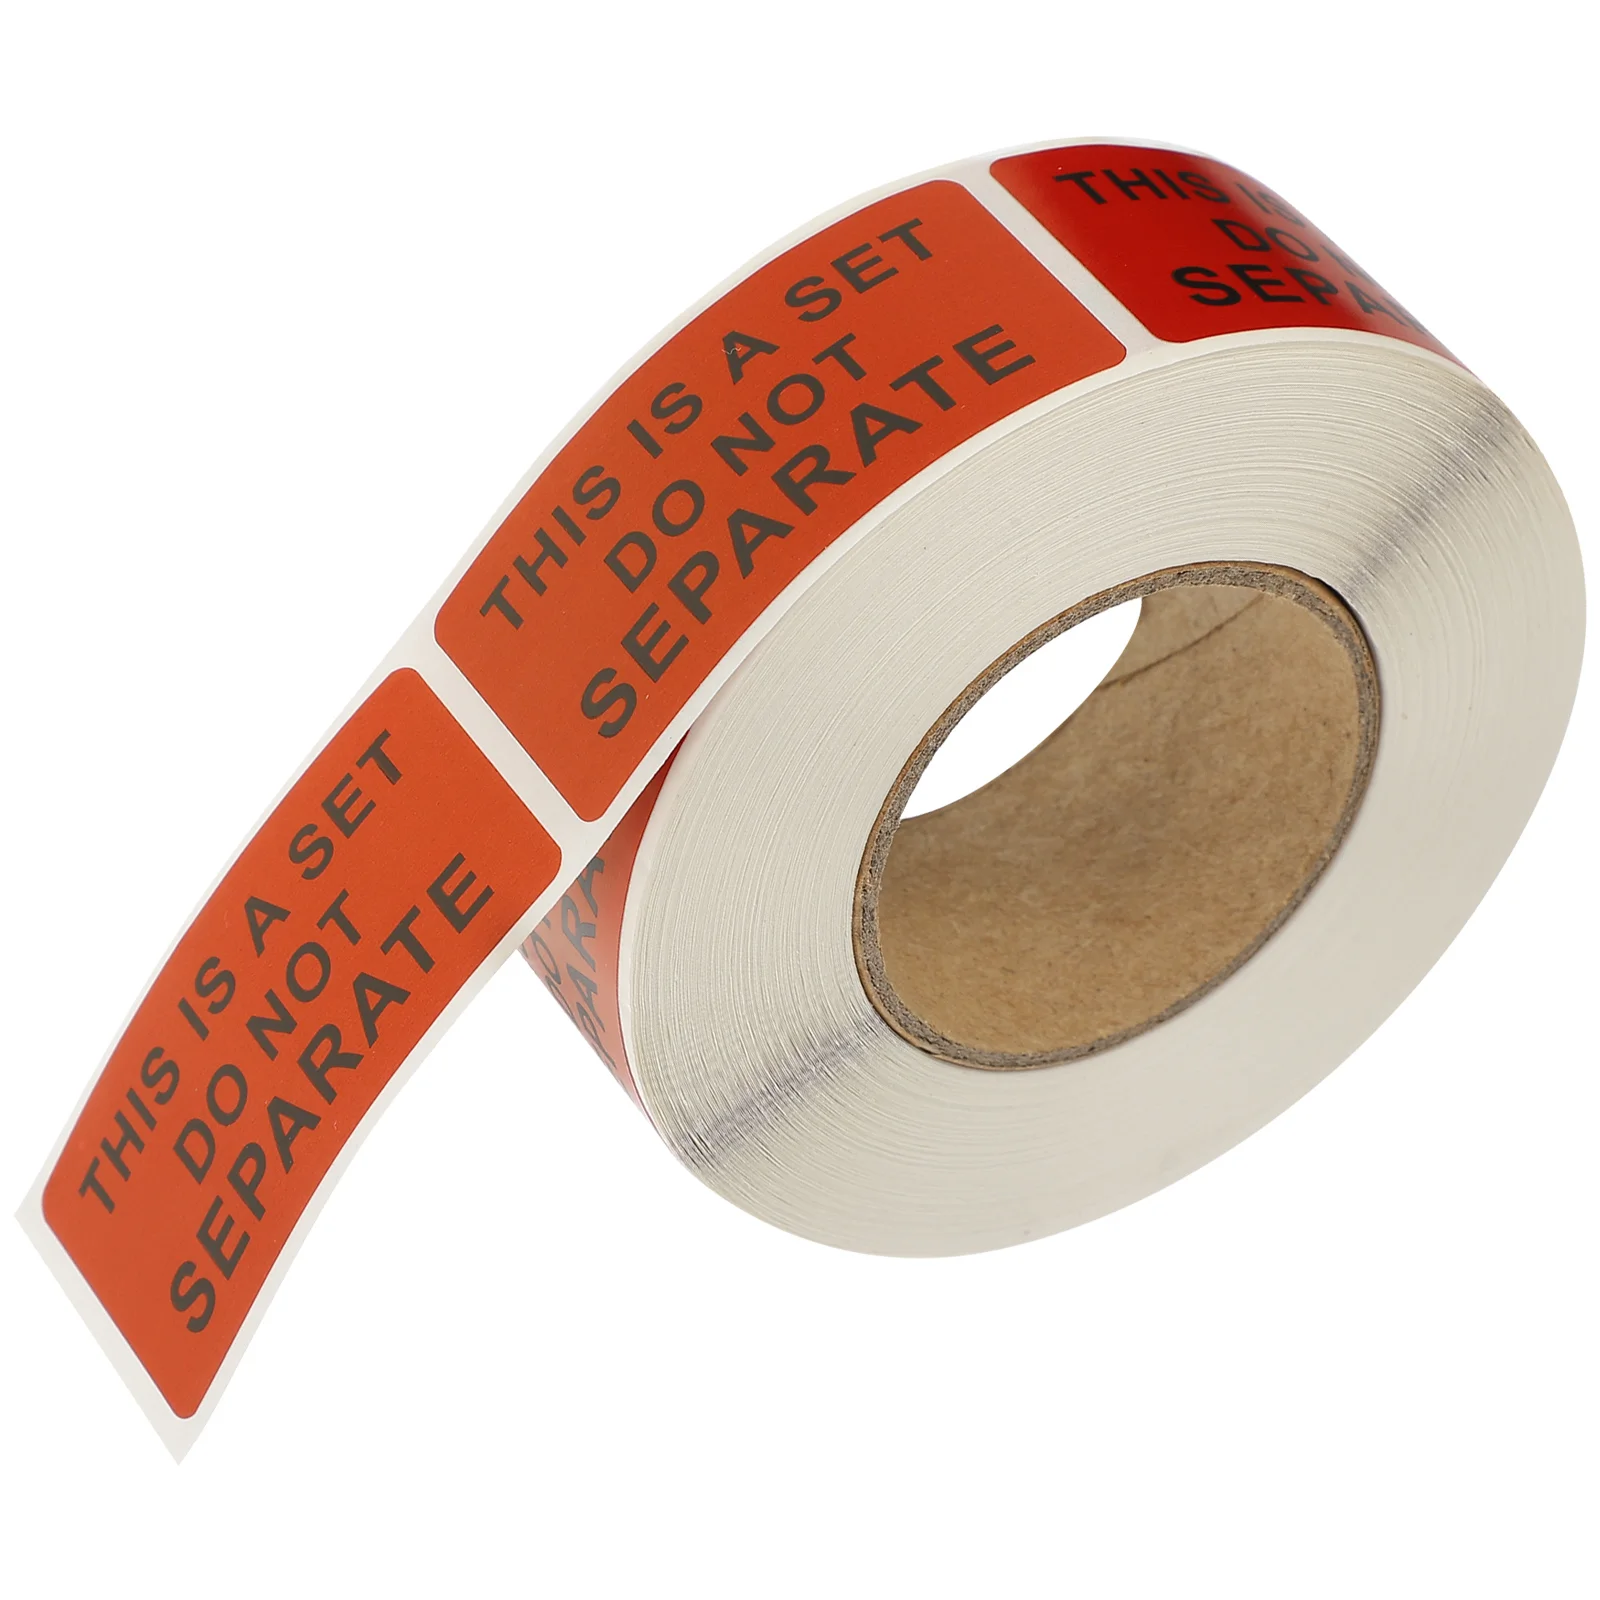 

1 Roll of Adhesive Shipping Sticker This is a Set Do Not Separate Warning Label Decal